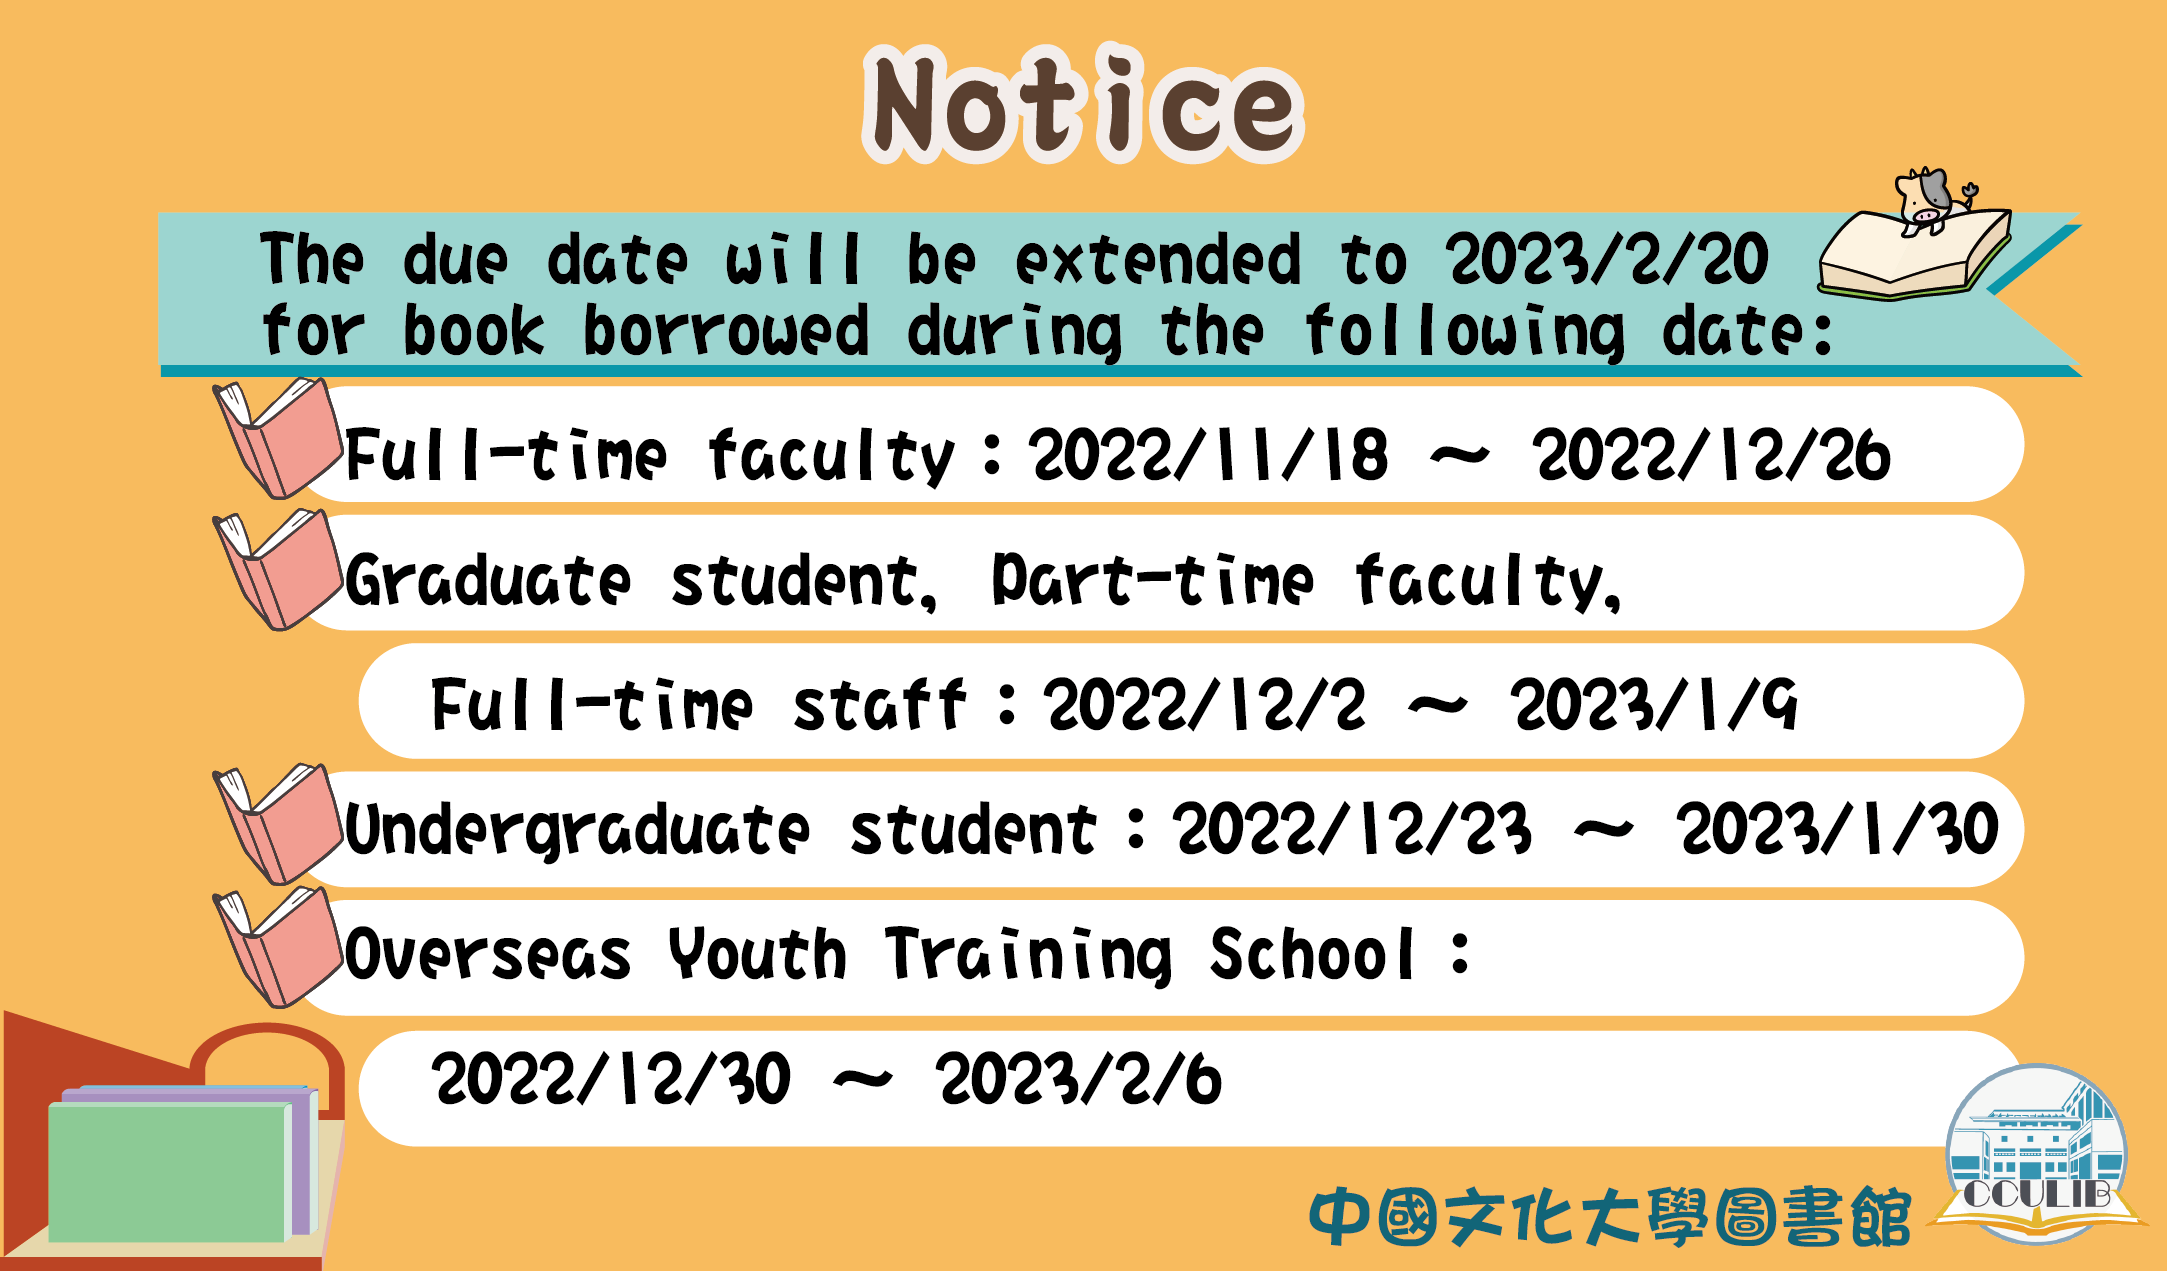 the due date will be extended to 2023/2/20